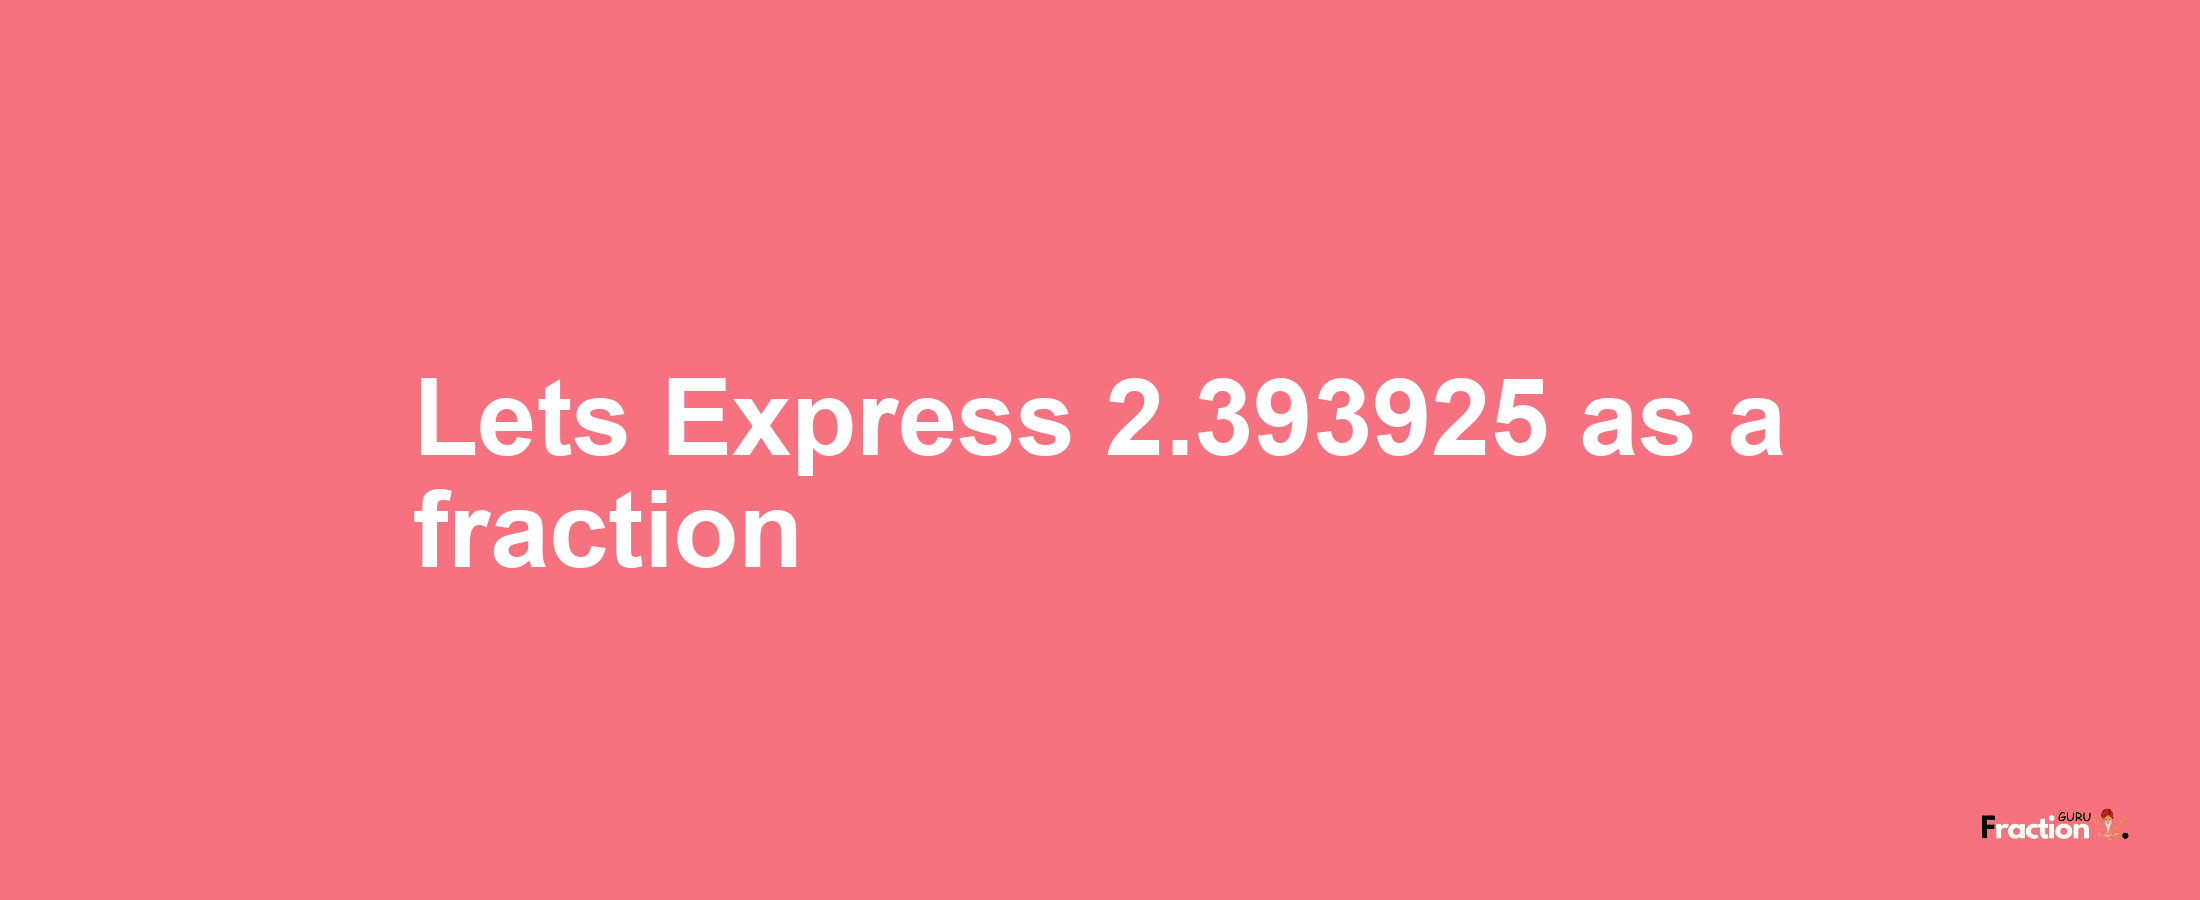 Lets Express 2.393925 as afraction